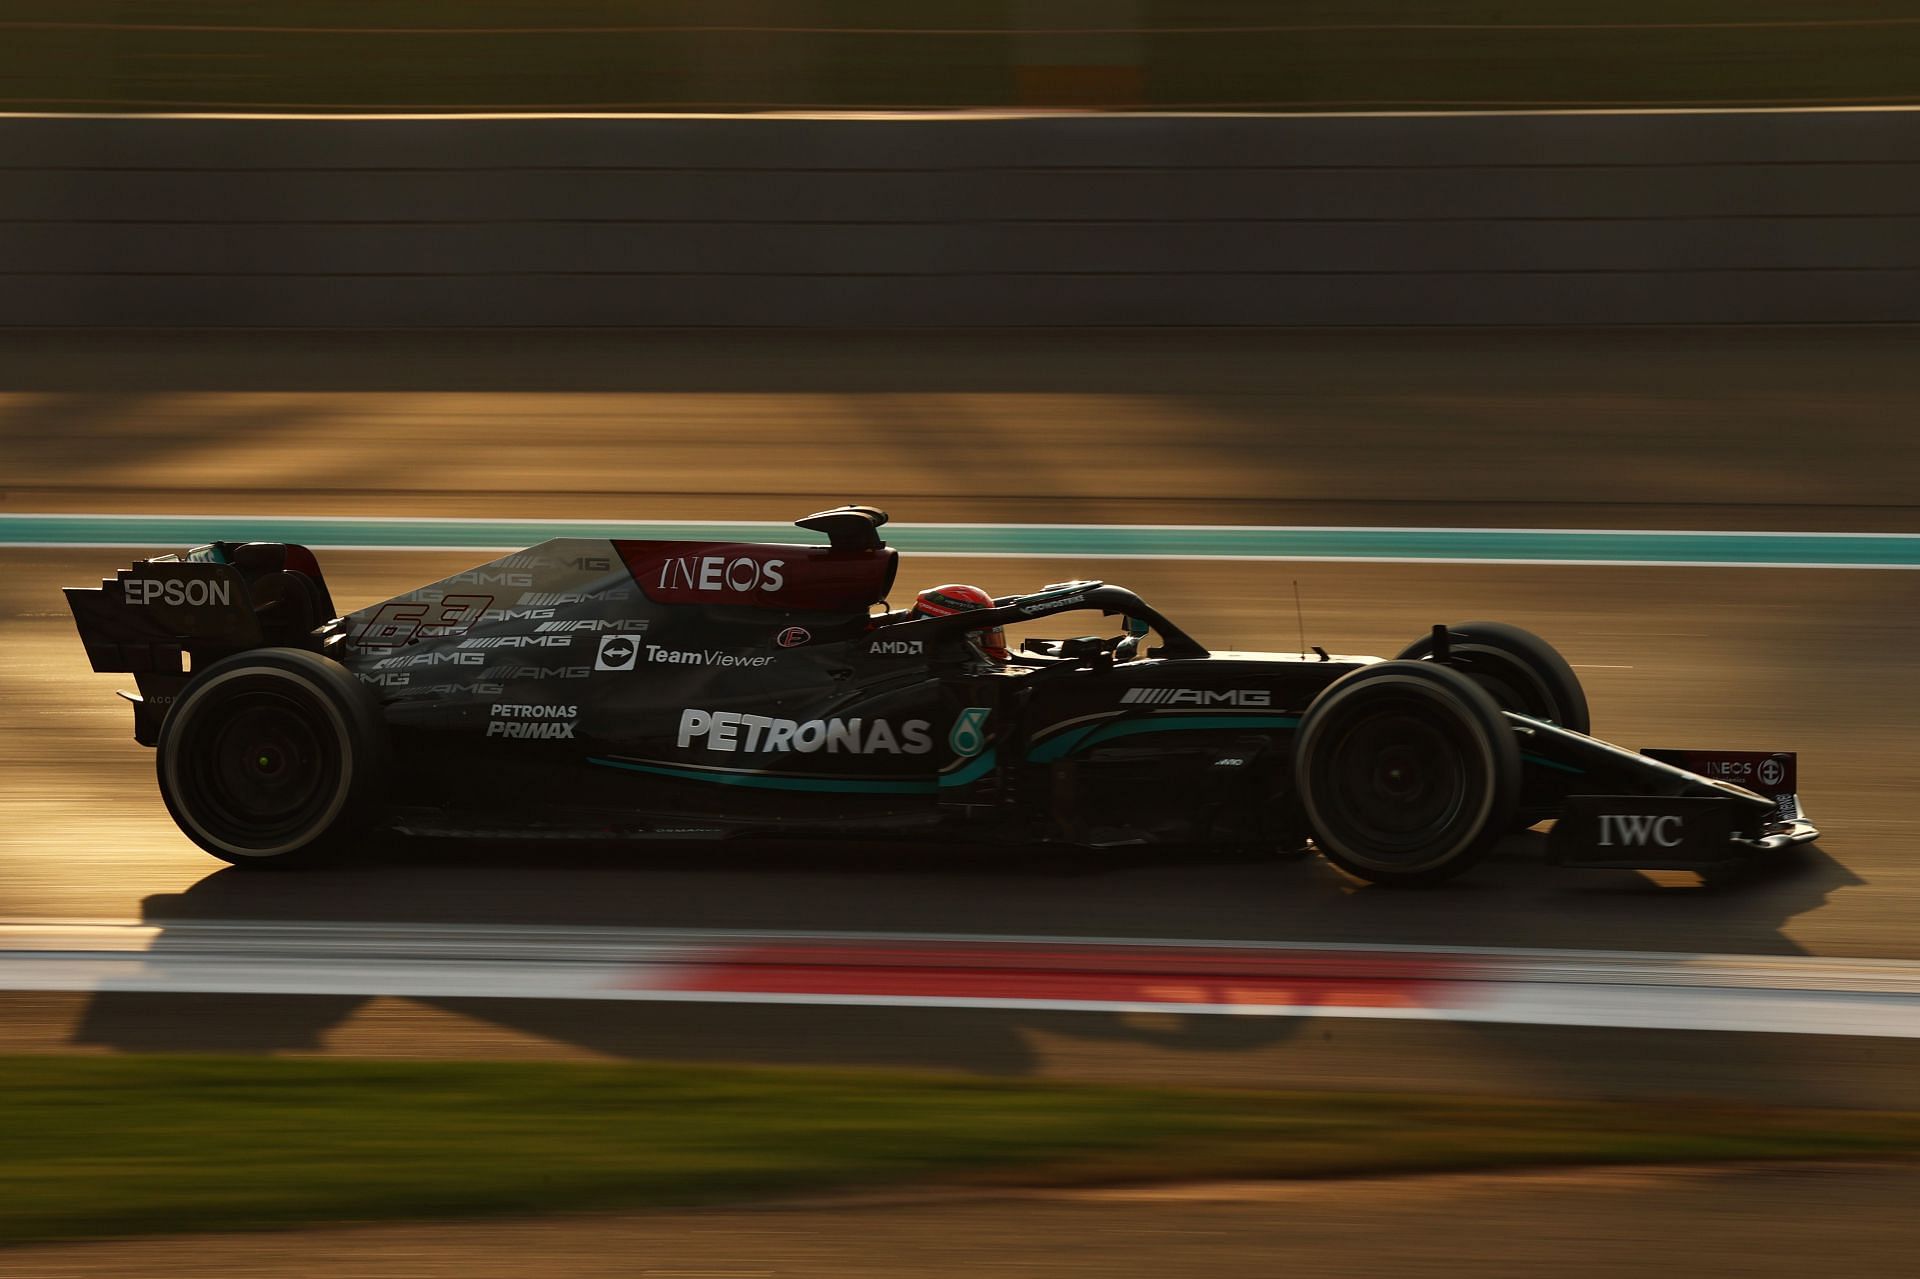 The Mercedes of George Russell during the testing in Abu Dhabi